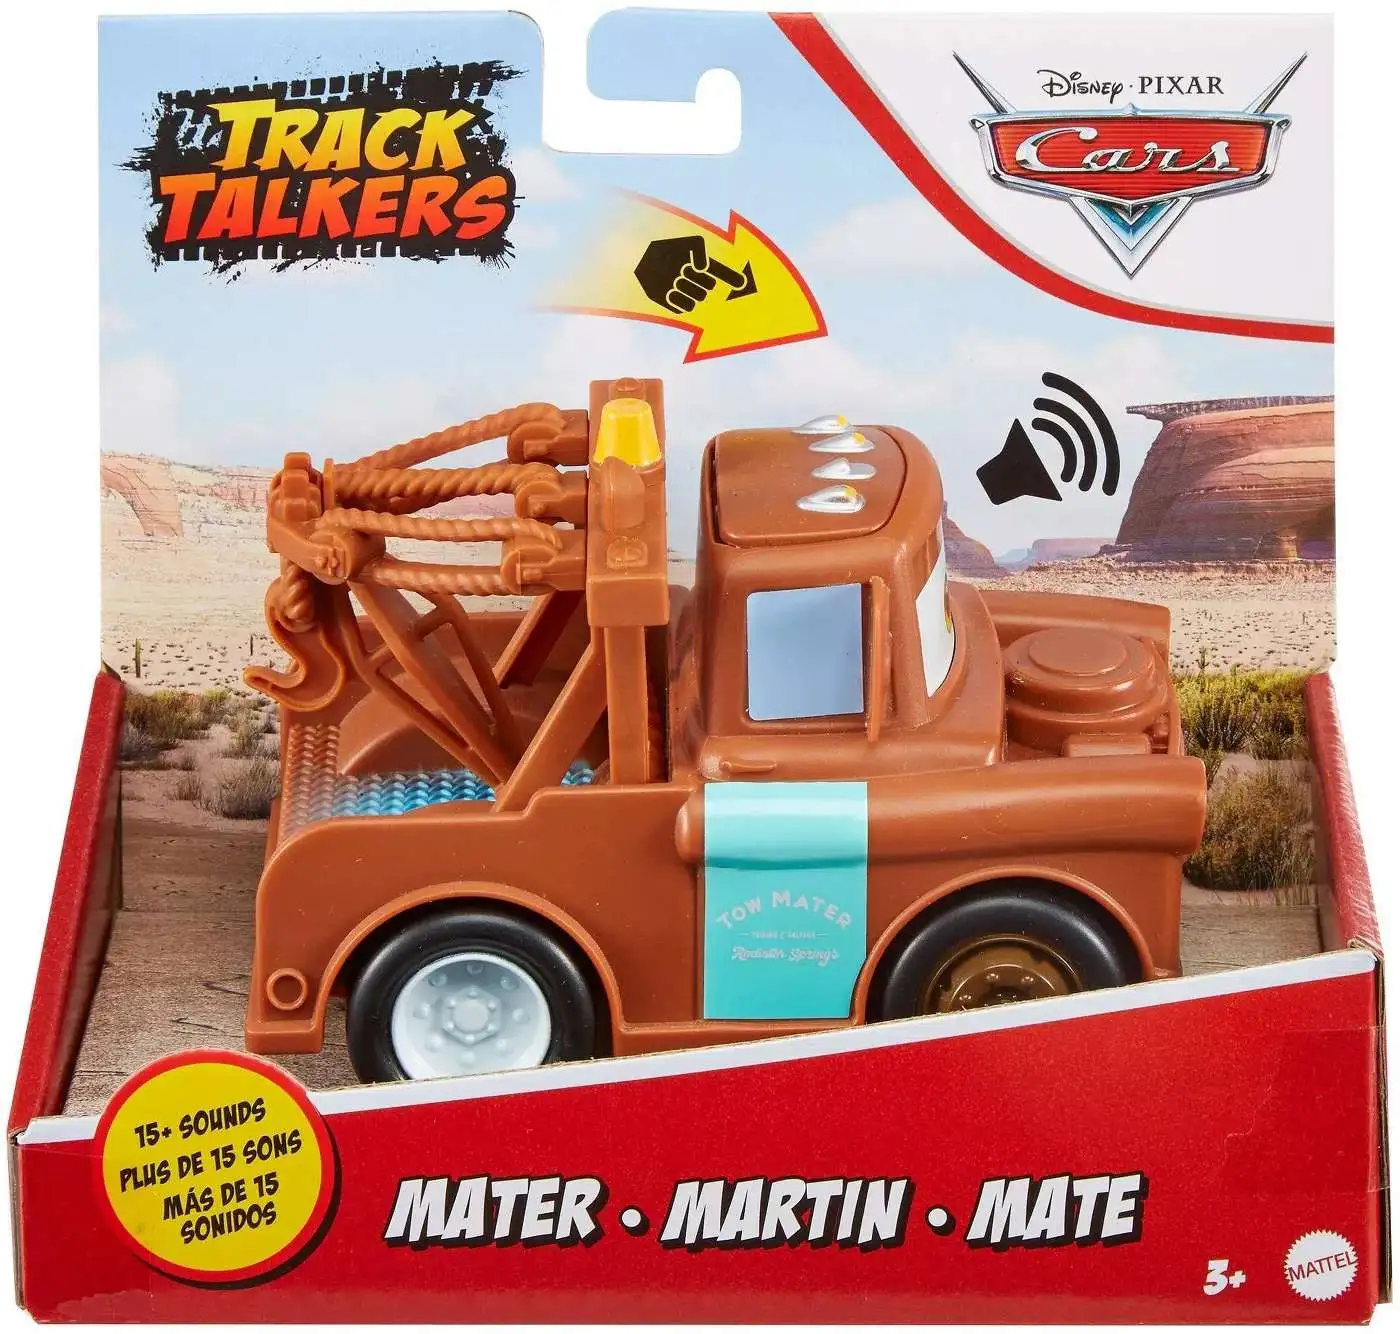 Sounds & Phrases Details about   Disney Pixar Cars Track Talkers MATER Toy Vehicle with 15